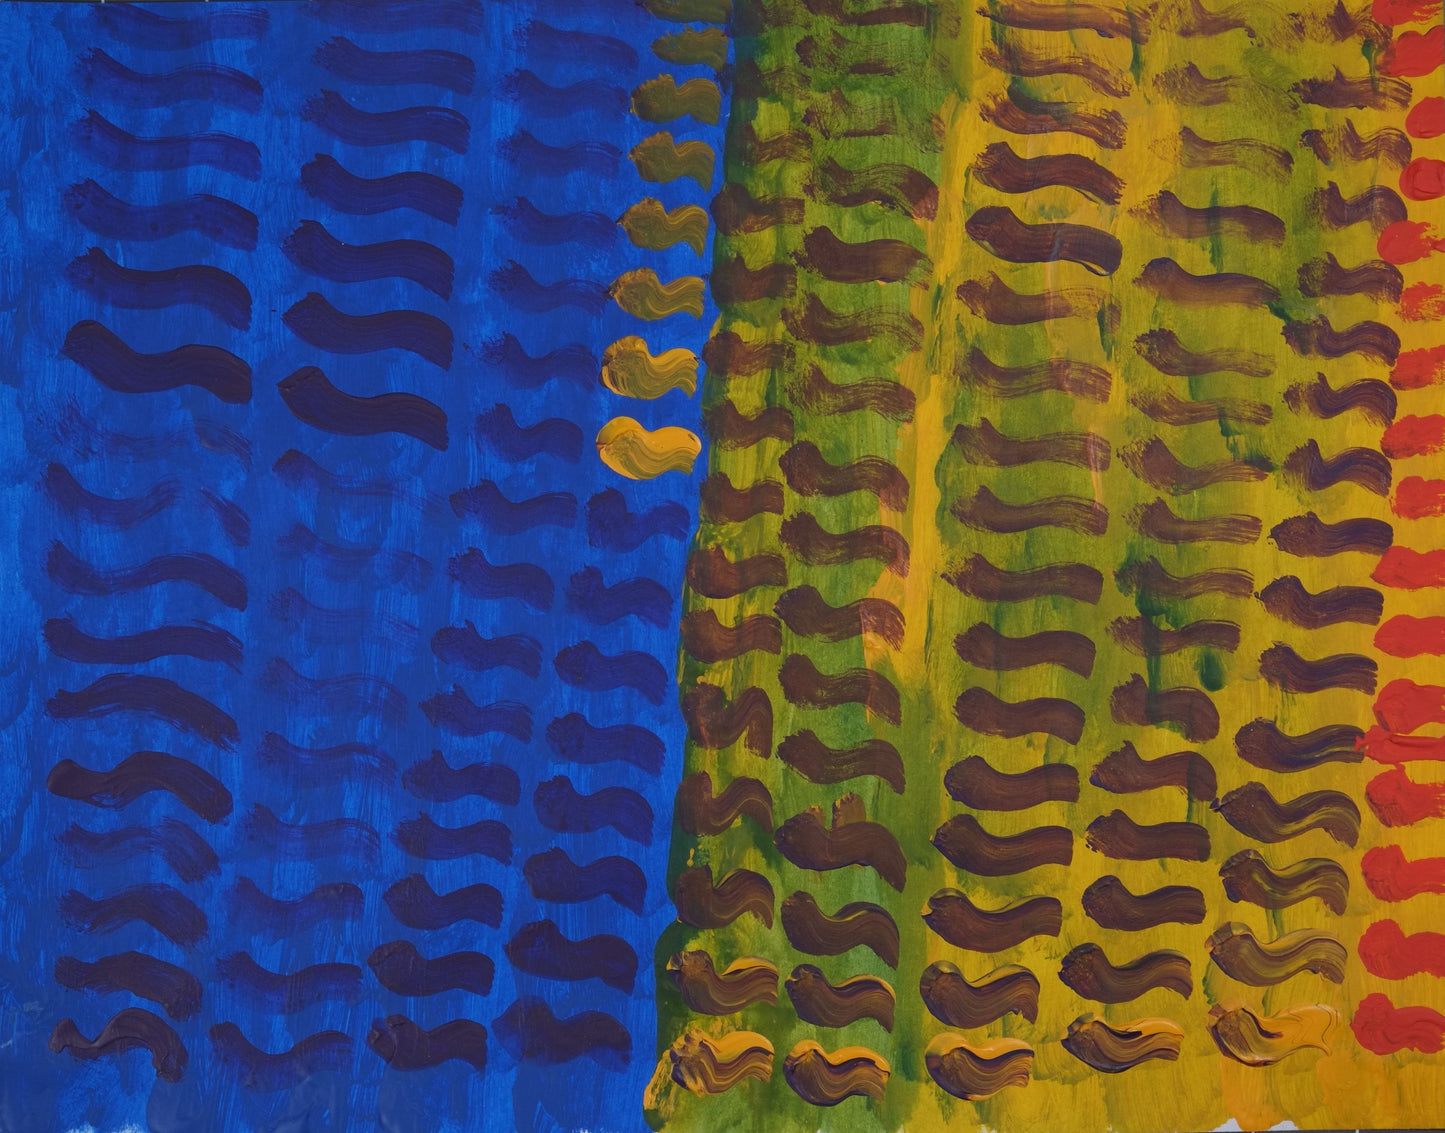 Acrylic on paper artwork with a background of half blue on the left and yellow on the right beneath blue, yellow, purple and red squiggles in vertical lines